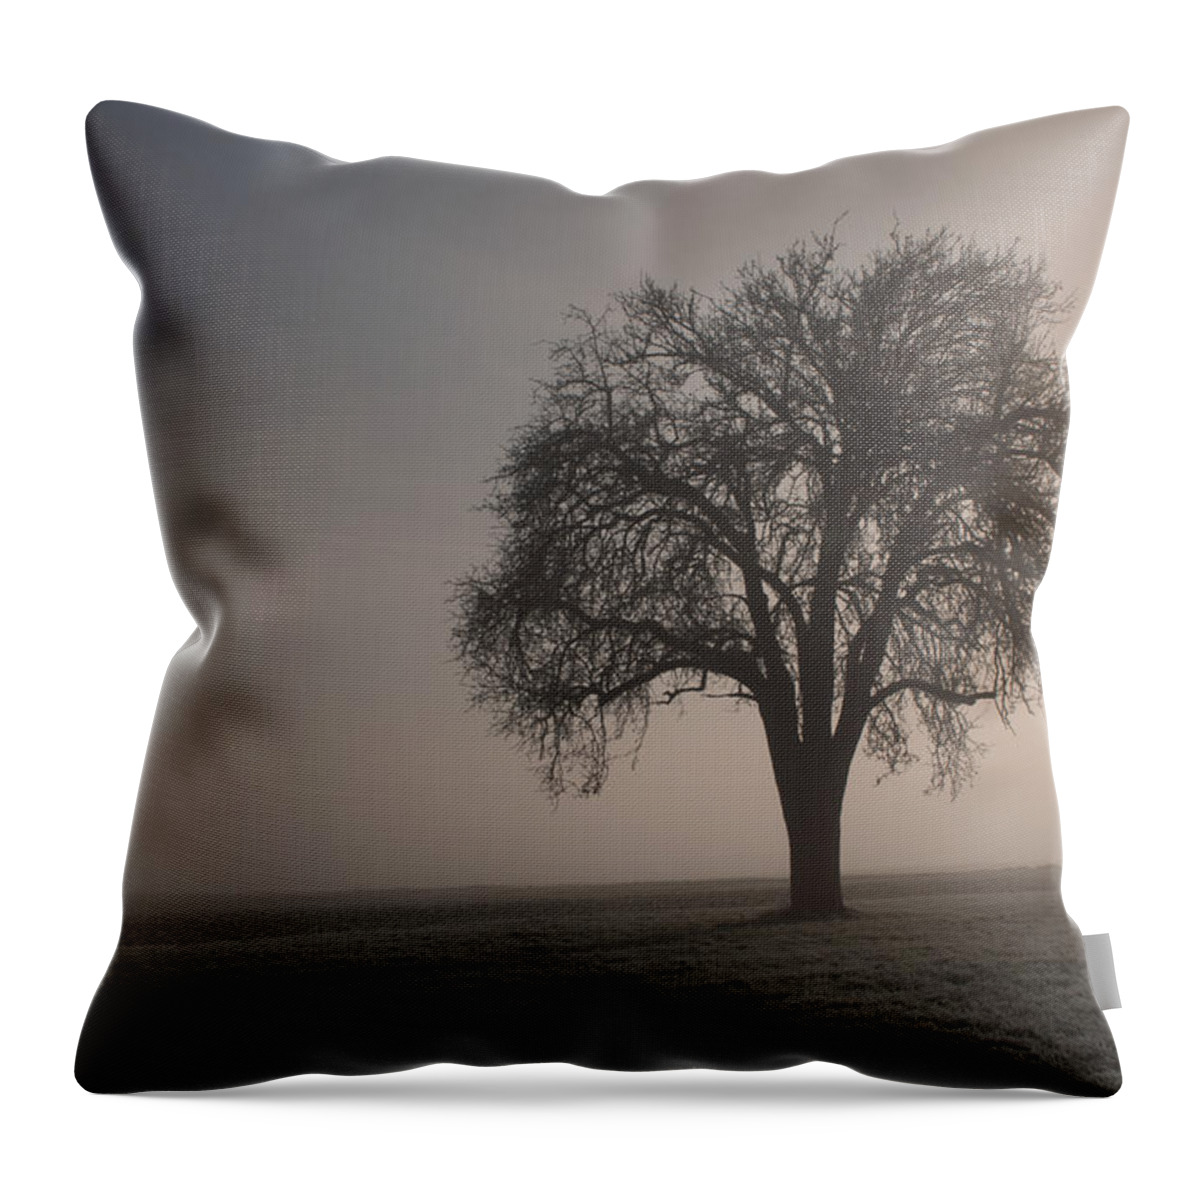 Sale Throw Pillow featuring the photograph Foggy Morning Sunshine by Miguel Winterpacht